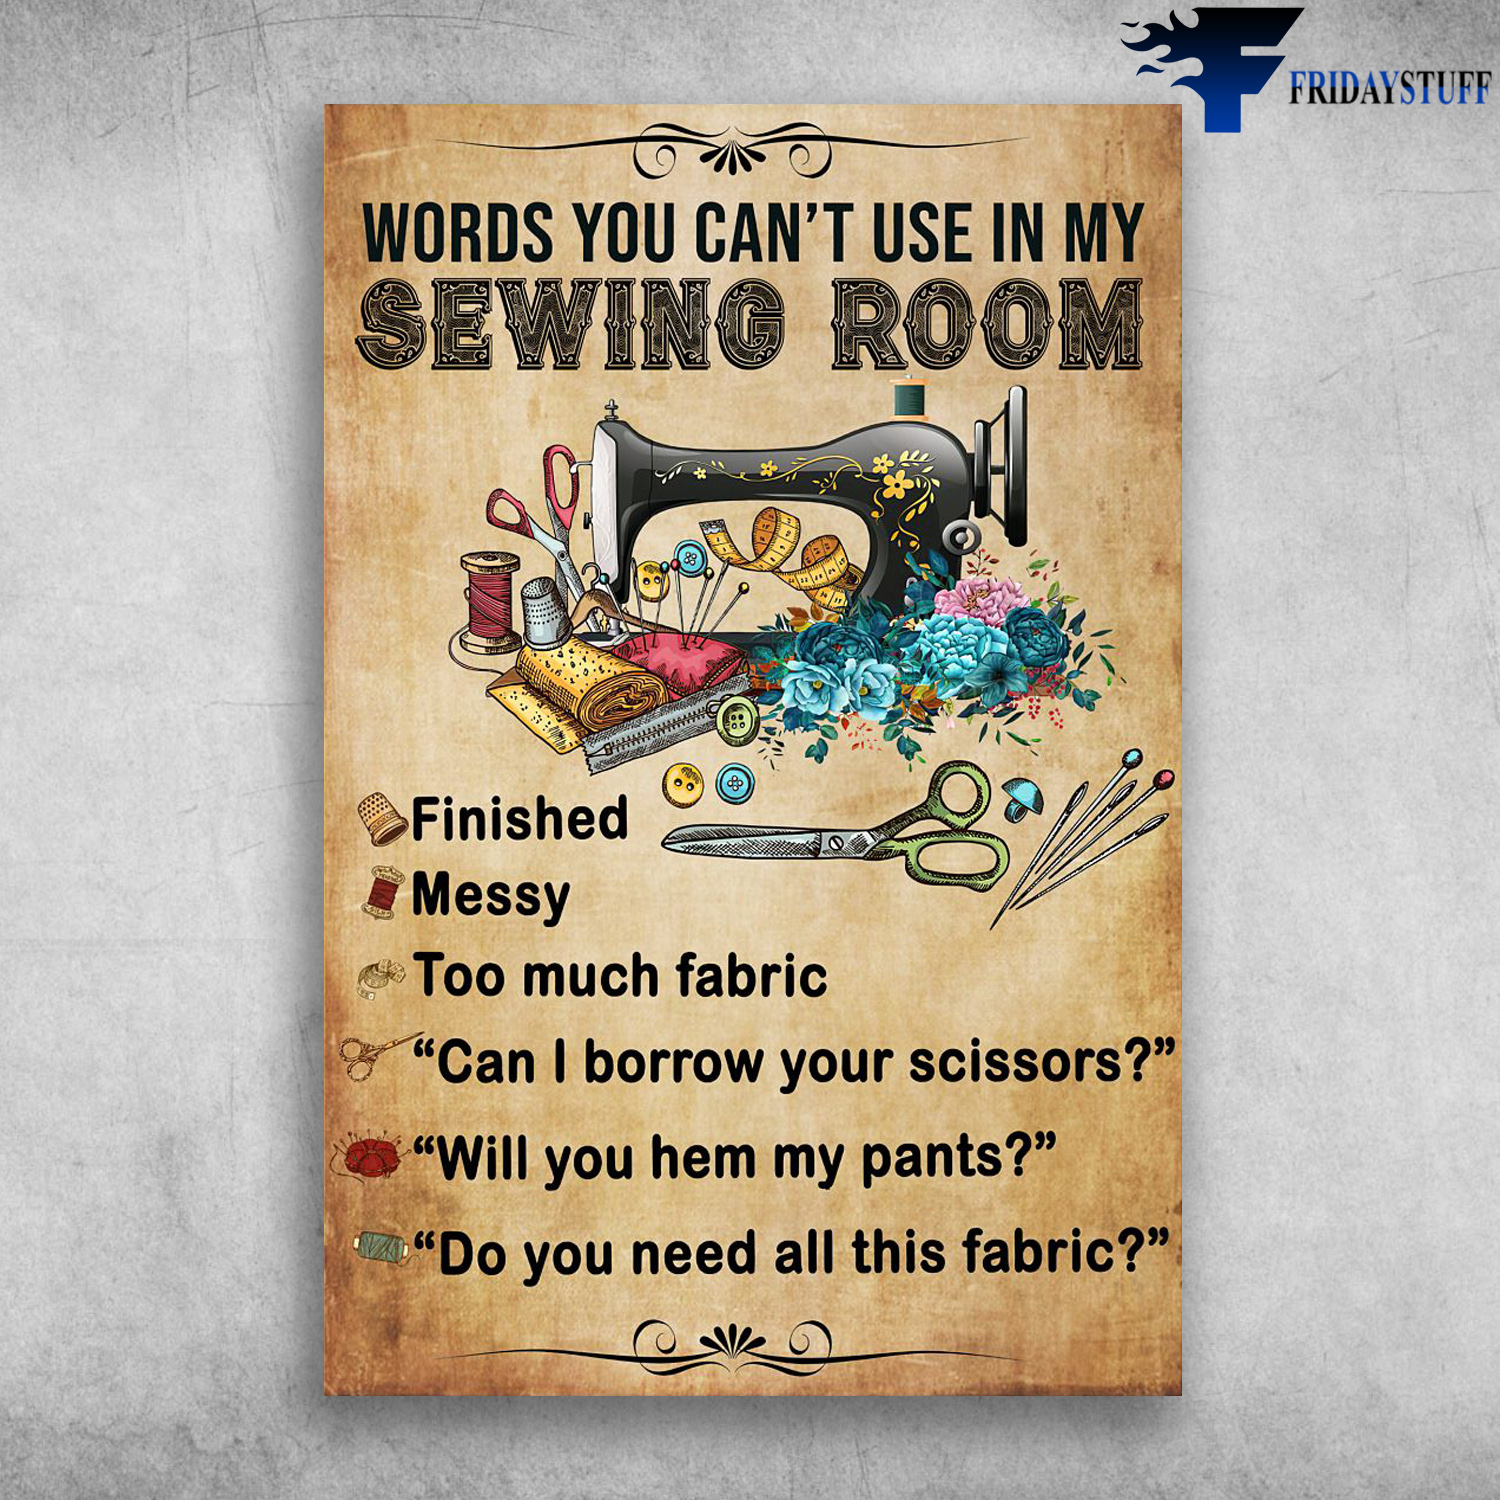 Sewino Room - Words You Can't Use In My Sewino Room, Finished, Messy, Too Much Fabric, Can I Borrow Yous Scissors, Will You Hem My Pants, Do You Need All This Fabric